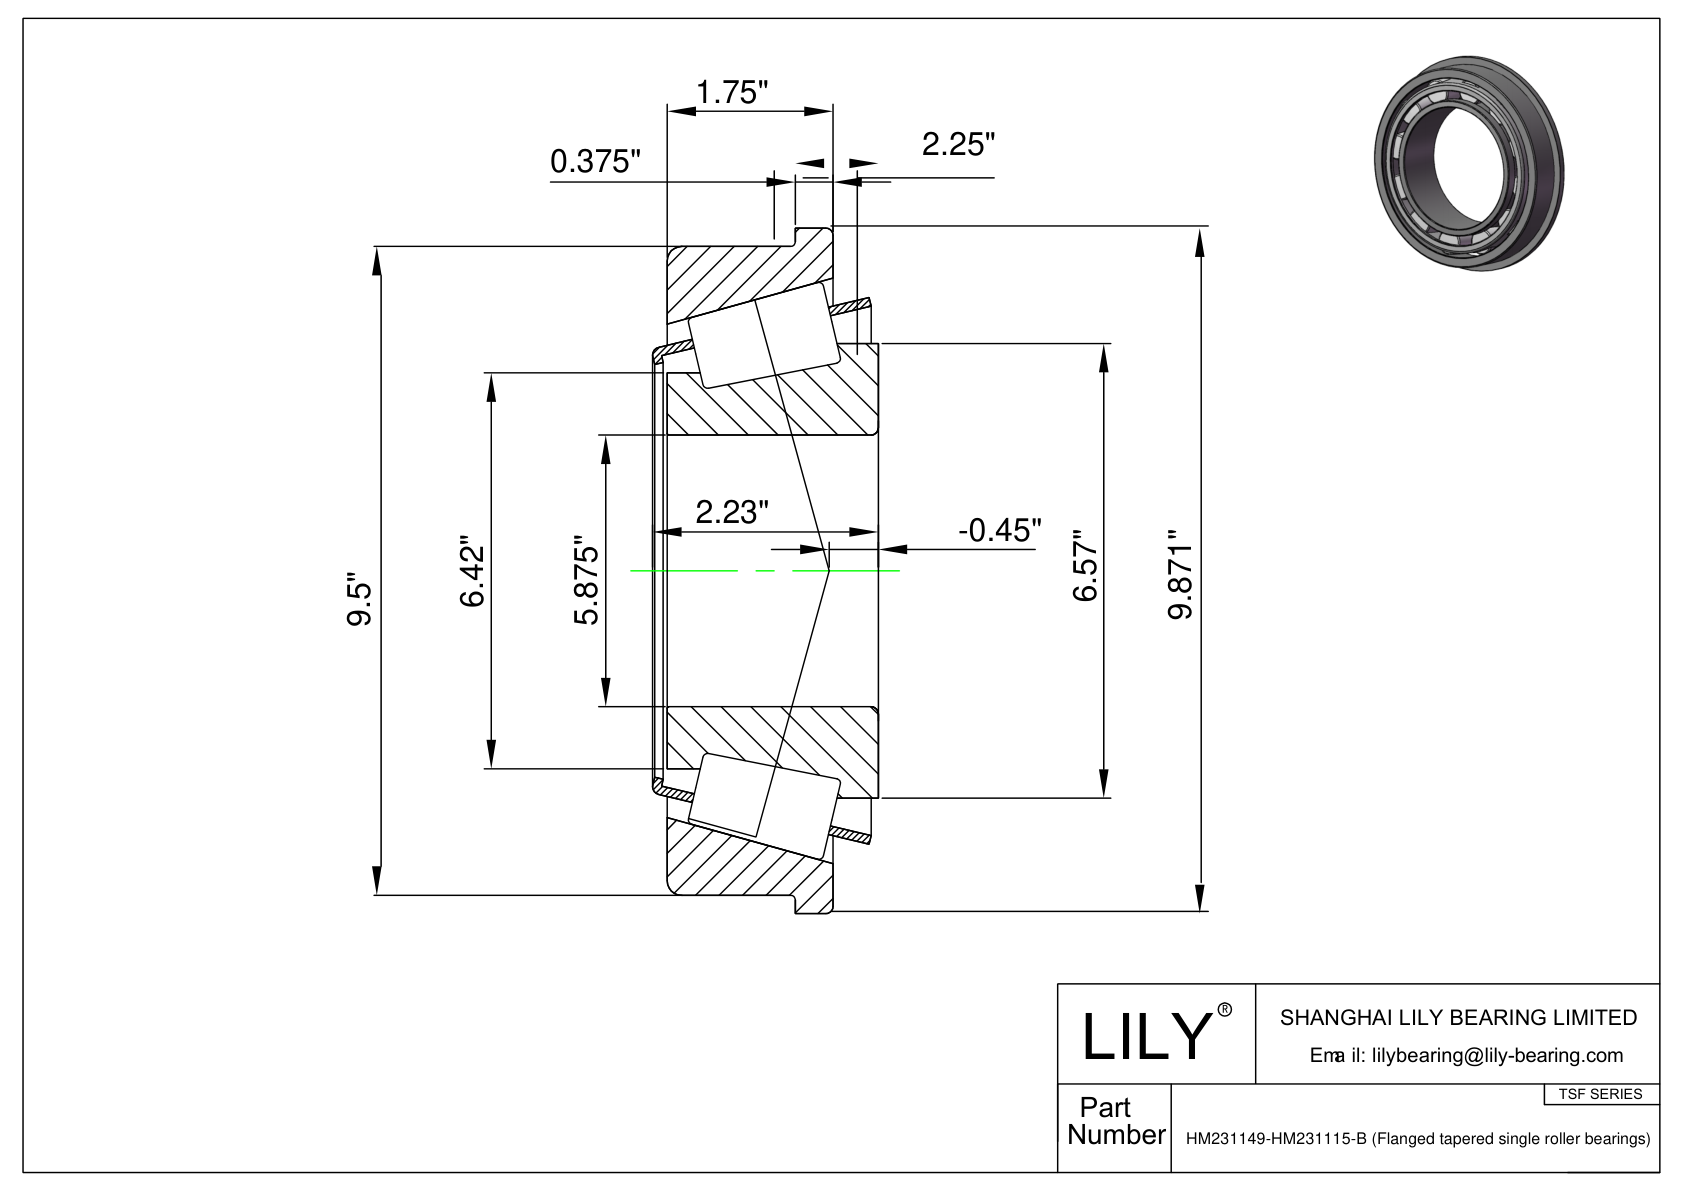 HM231149-HM231115-B TSF (Tapered Single Roller Bearings with Flange) (Imperial) cad drawing